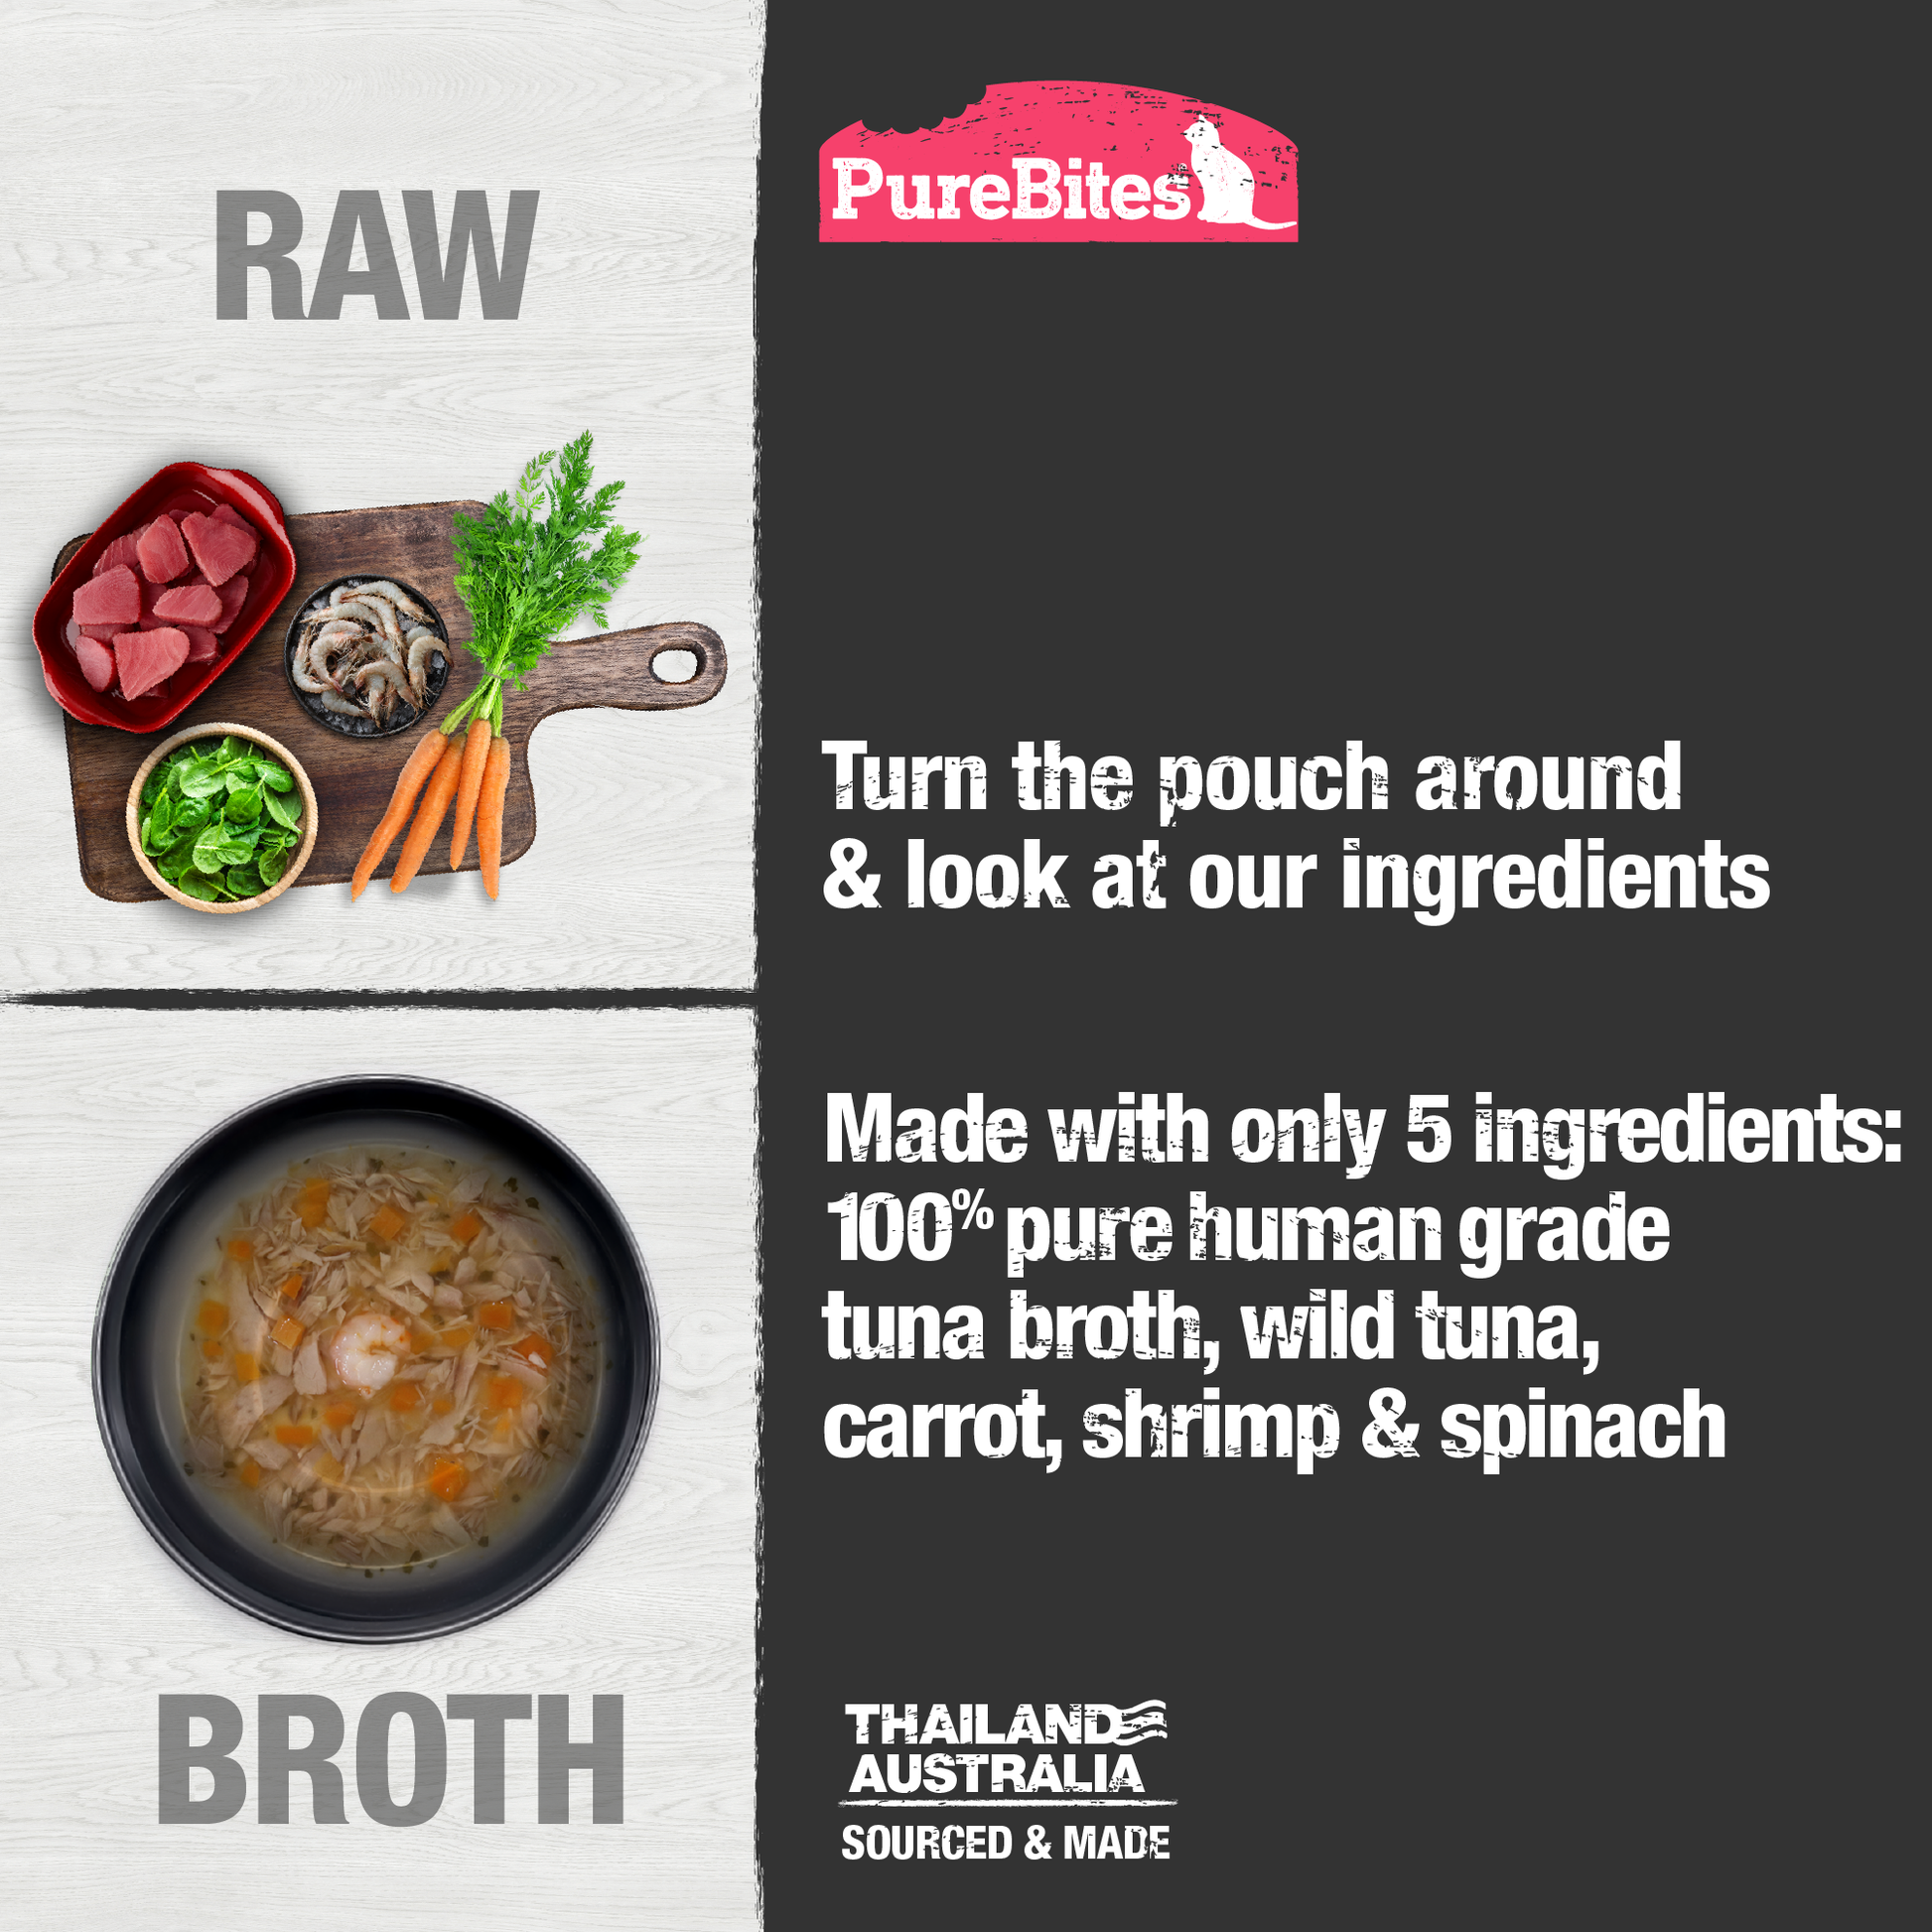 Made with only 5 Ingredients you can read, pronounce, and trust: Human grade tuna broth, tuna, carrot, shrimp, spinach.